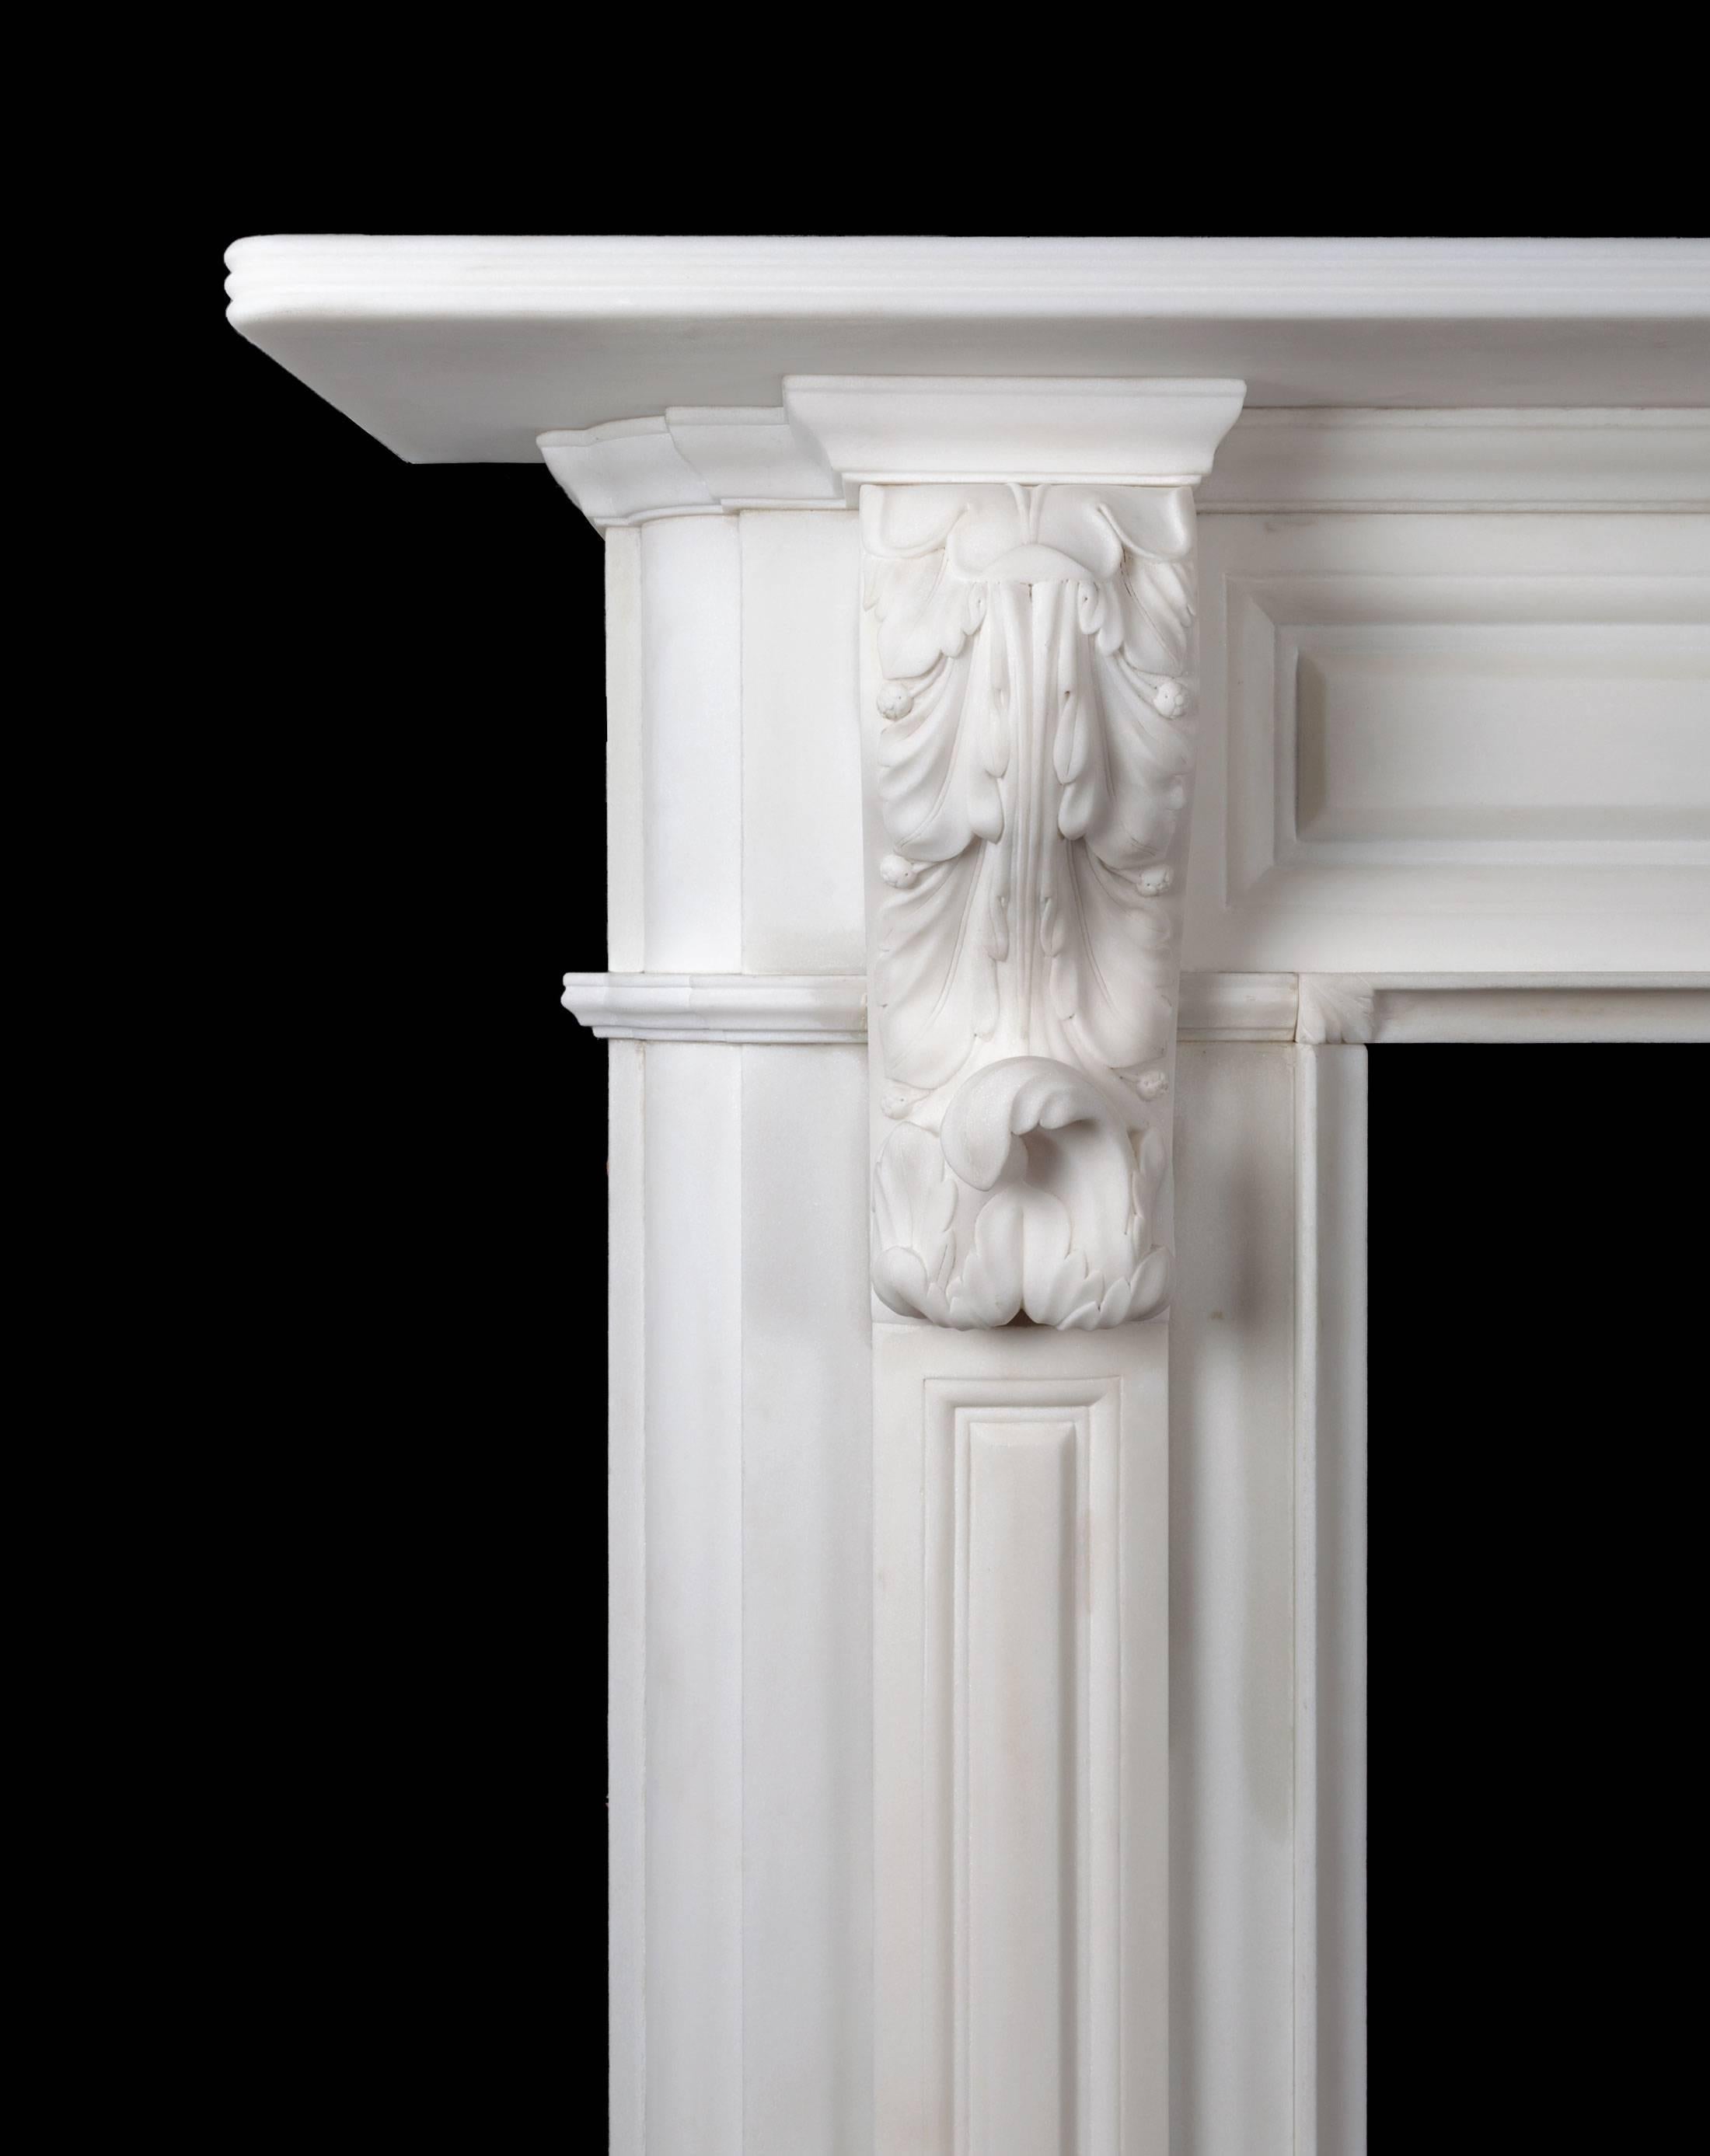 Carved Irish corbel marble fireplace by Ryan & Smith. A beautifully carved and well-proportioned large white marble fireplace, with carved acanthus bracket corbels and basket of flowers centre plaque. This style of fireplace is found in the finest